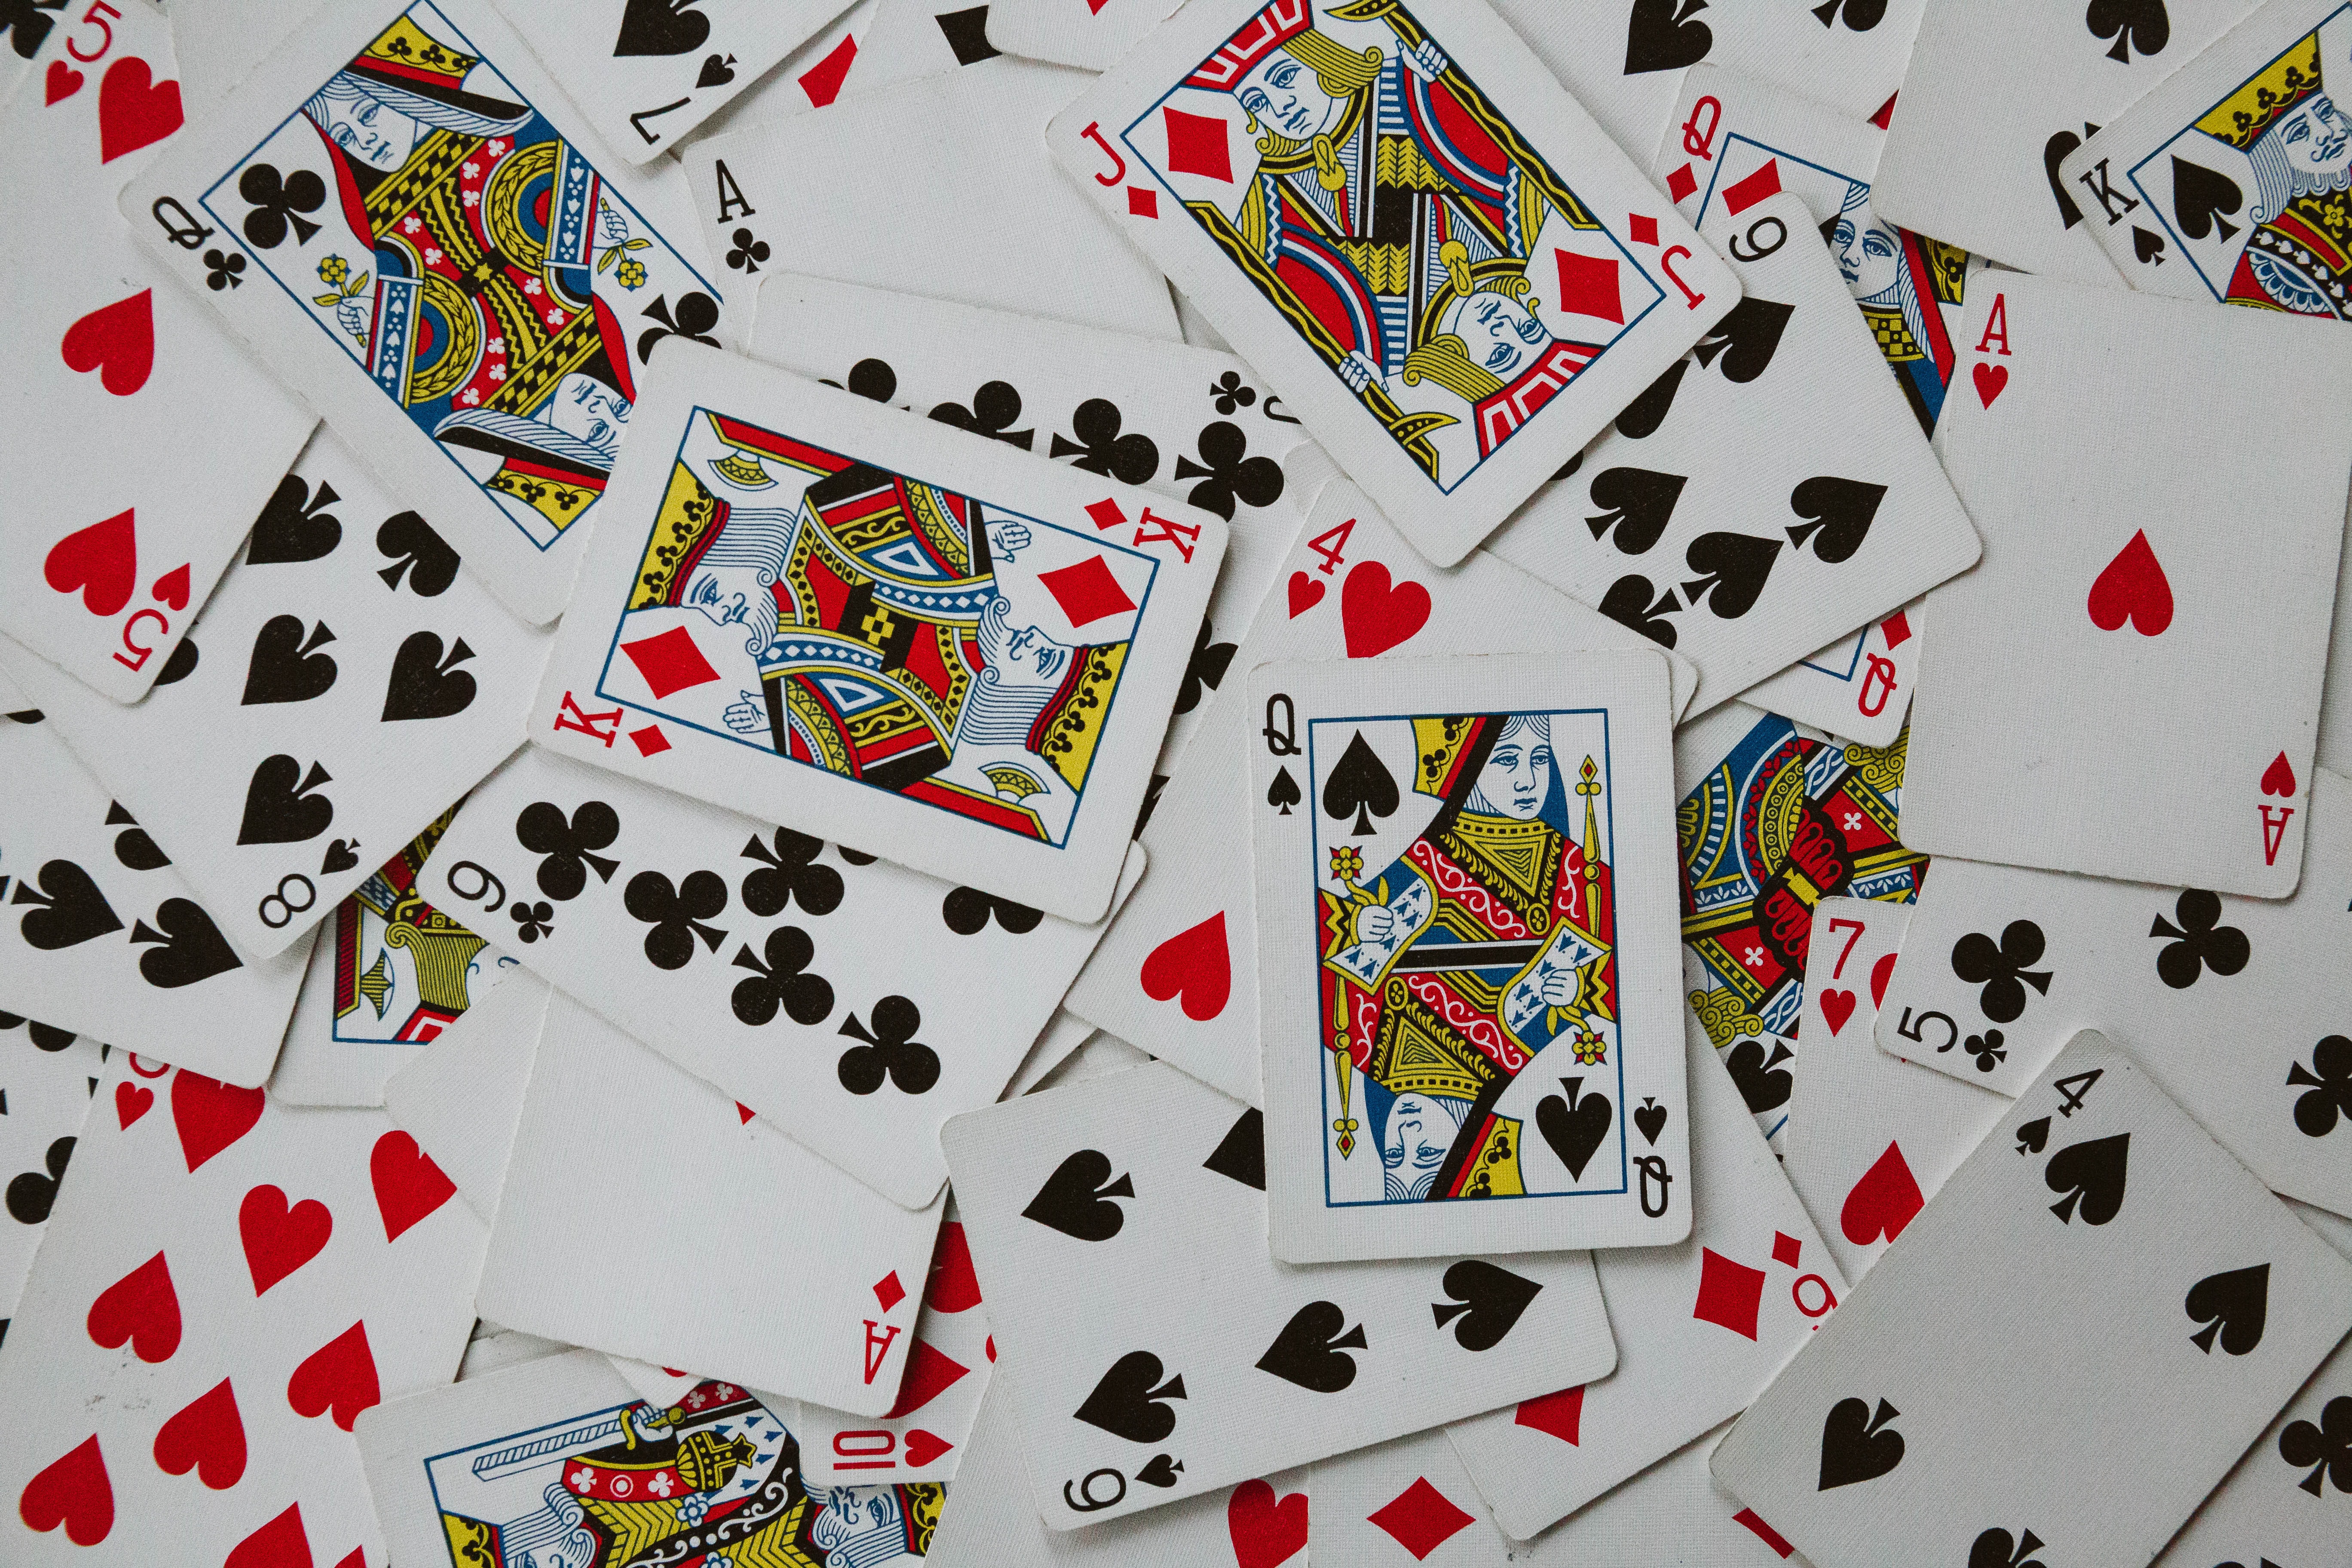 cards, miscellanea, miscellaneous, pattern, playing cards